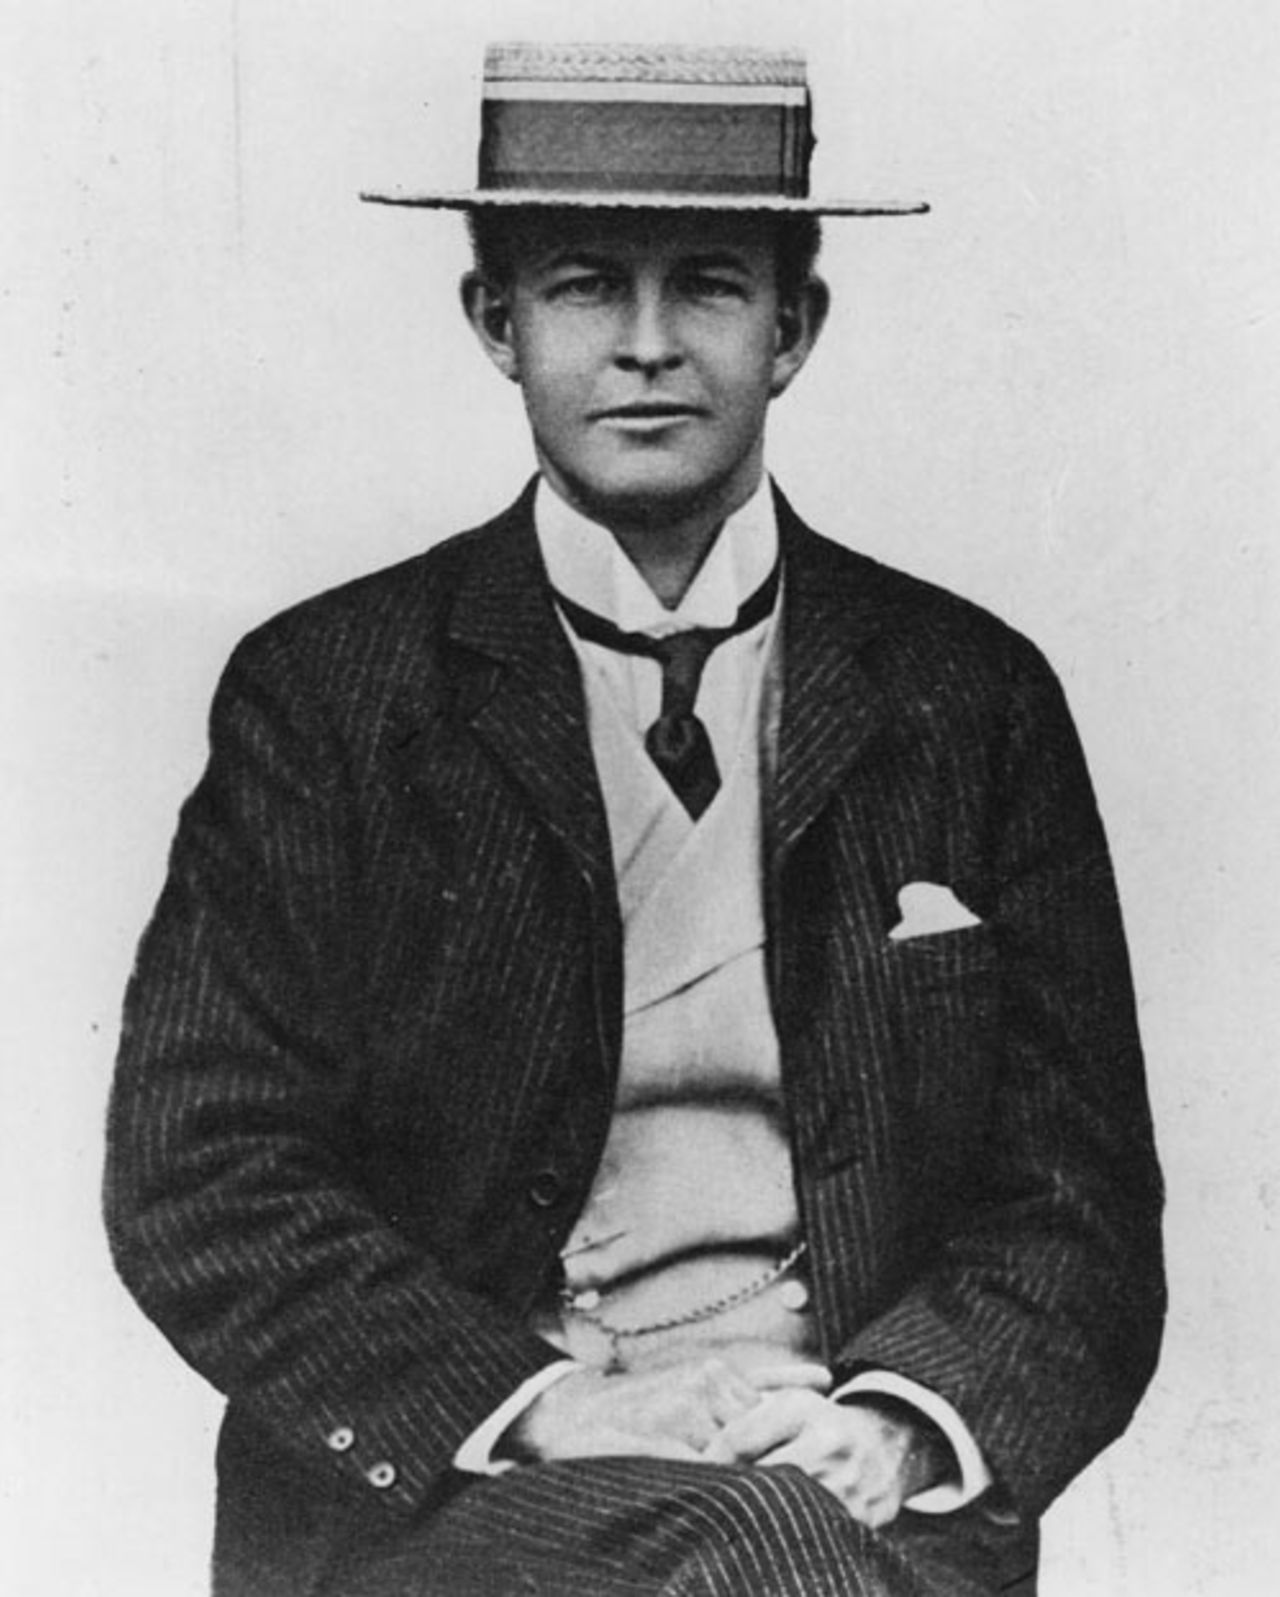 Sir Plum Warner poses for a photograph, 1904